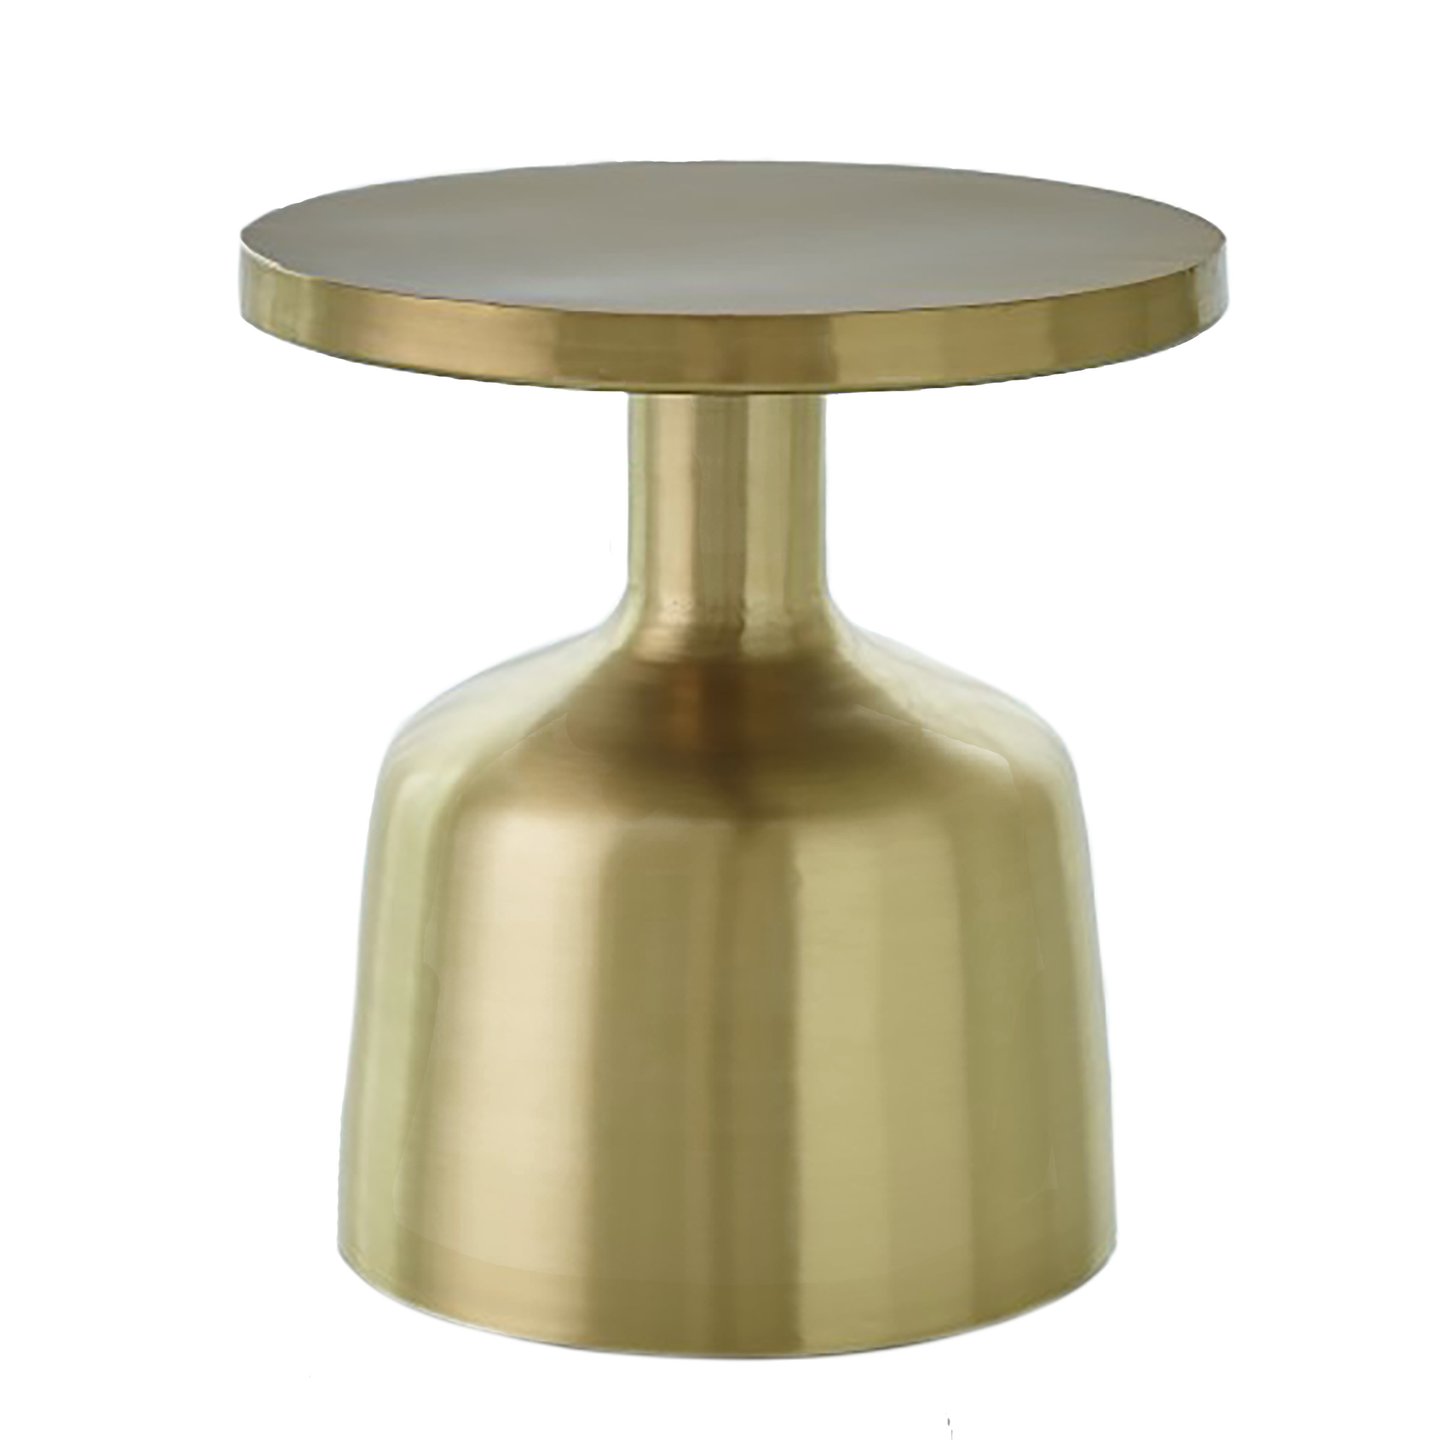 studio neutra accent table satin brass studioatablebrass round silver area rug retro style sofa york furniture acrylic rod inch tablecloth navy blue bar console with doors diy